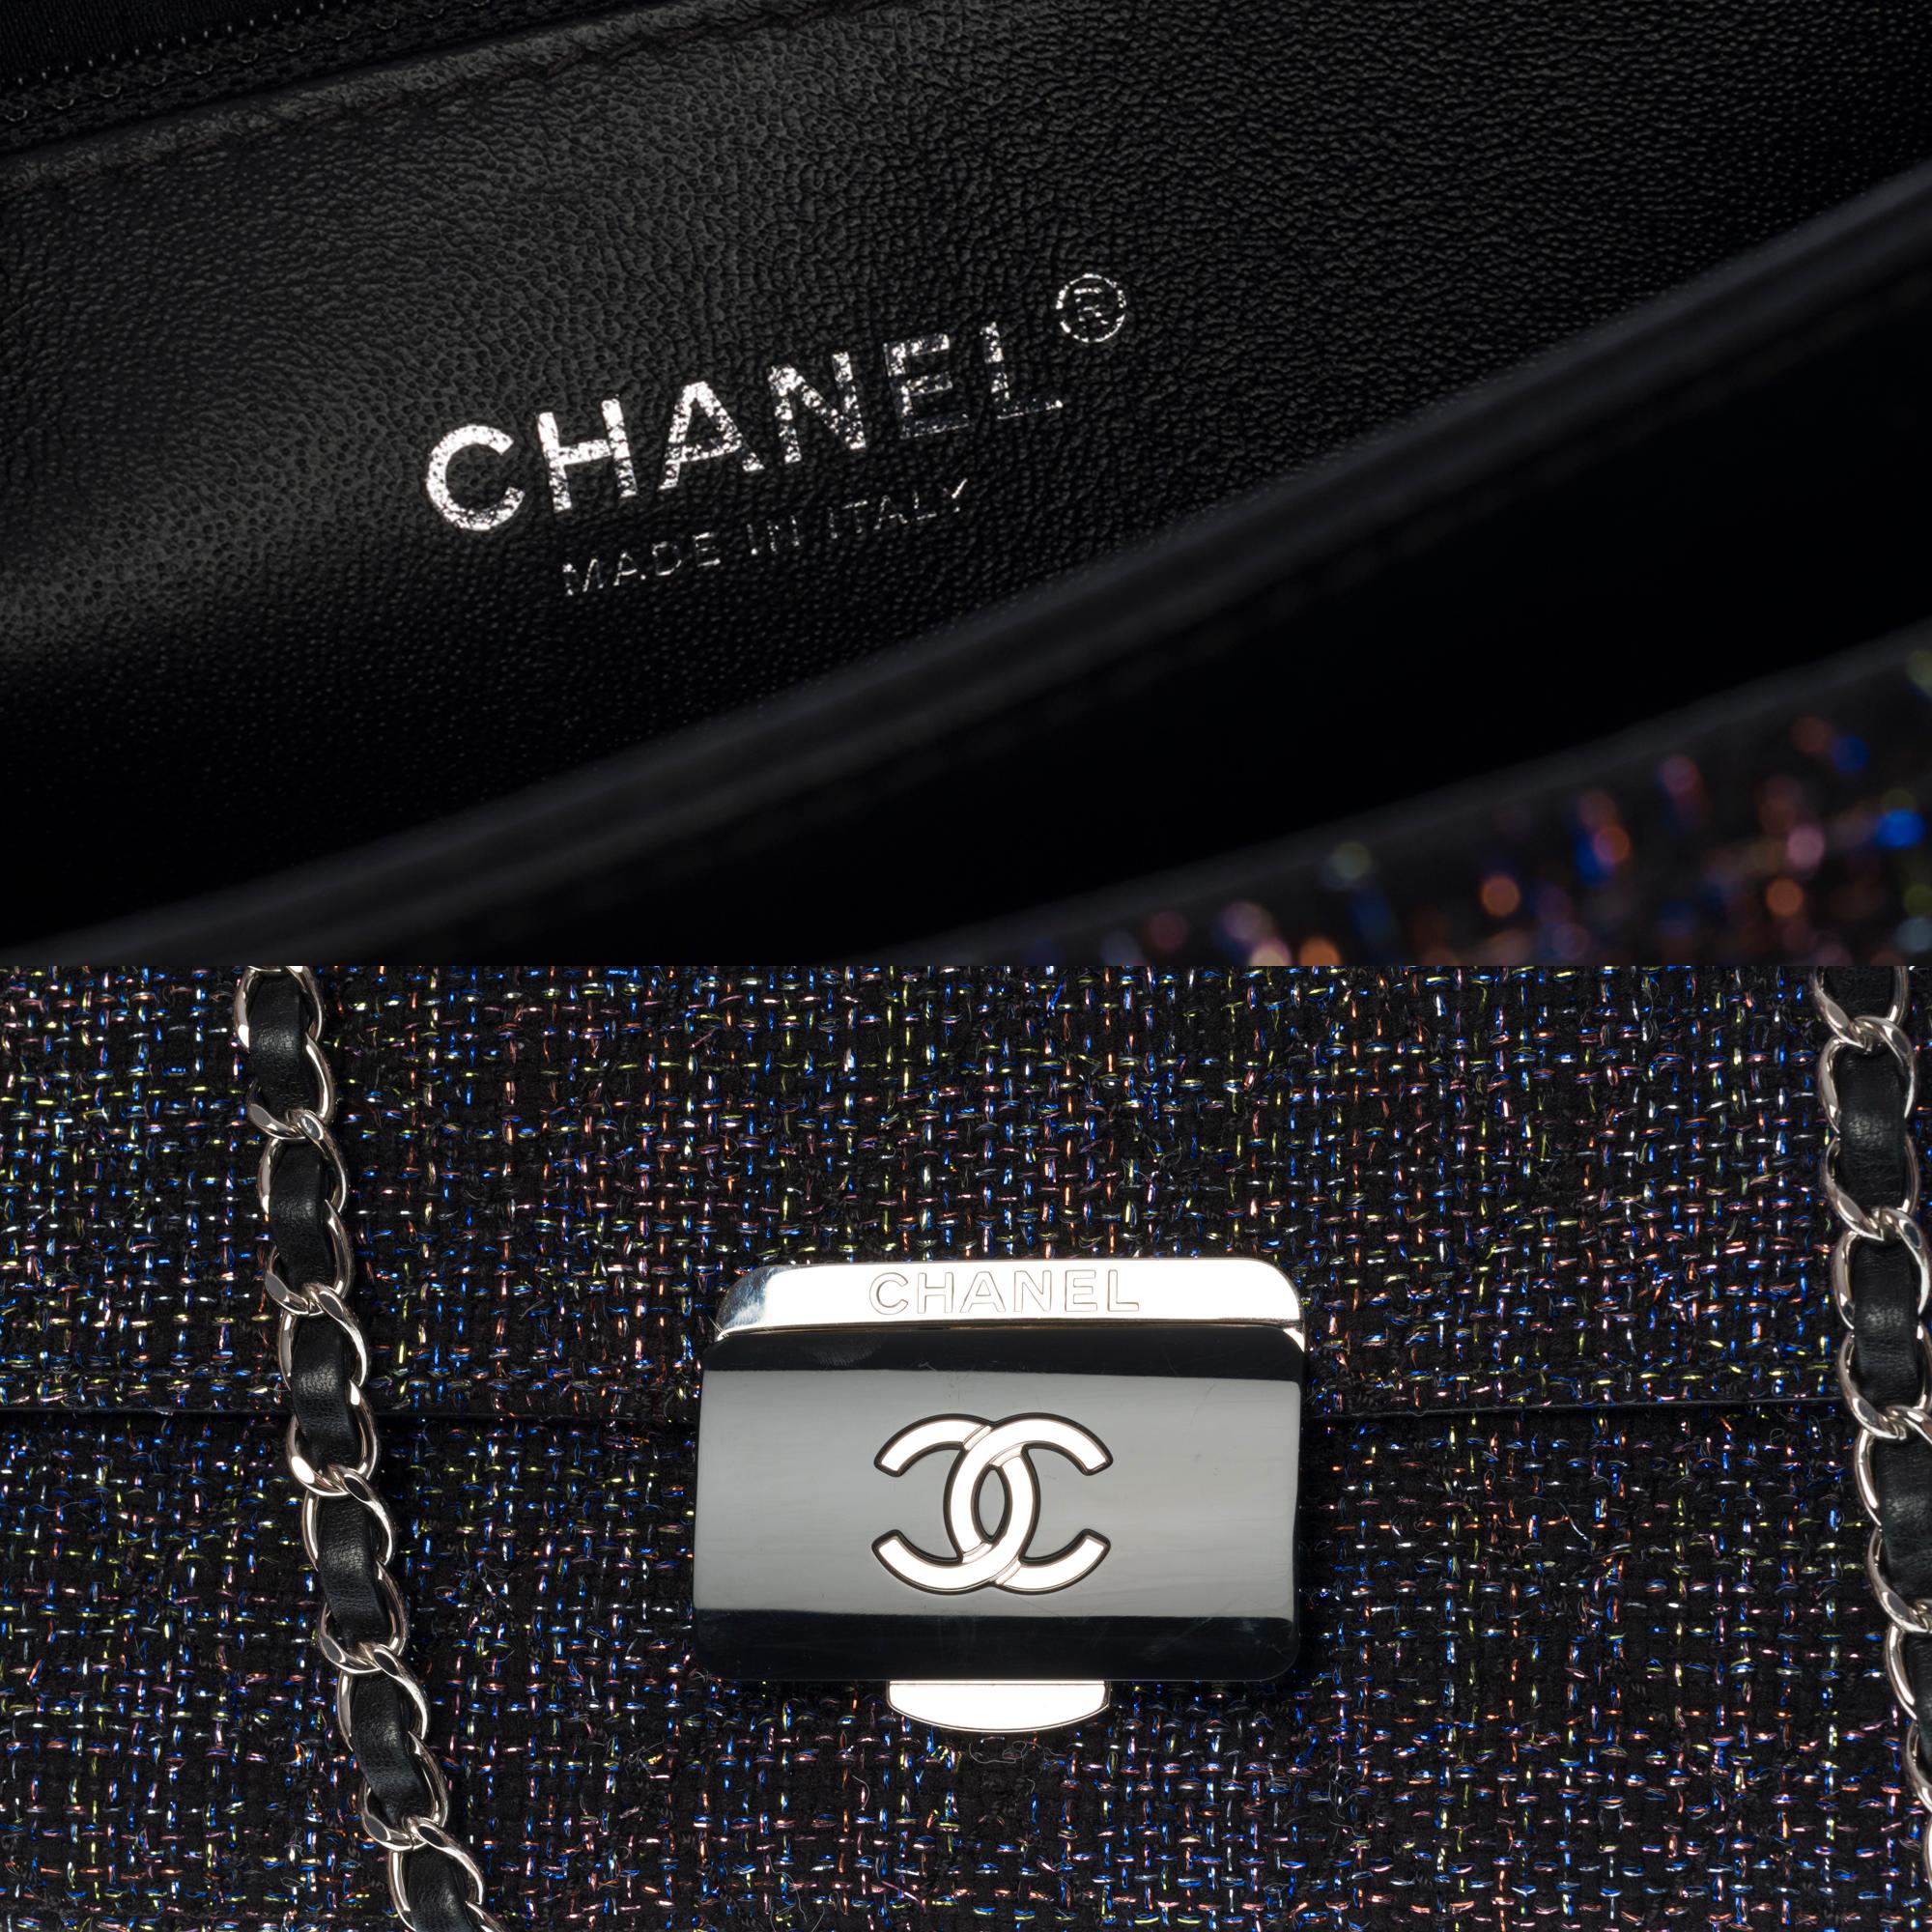 Rare Chanel Classic Flap shoulder Bag in black Tweed and glittery threads, SHW 1